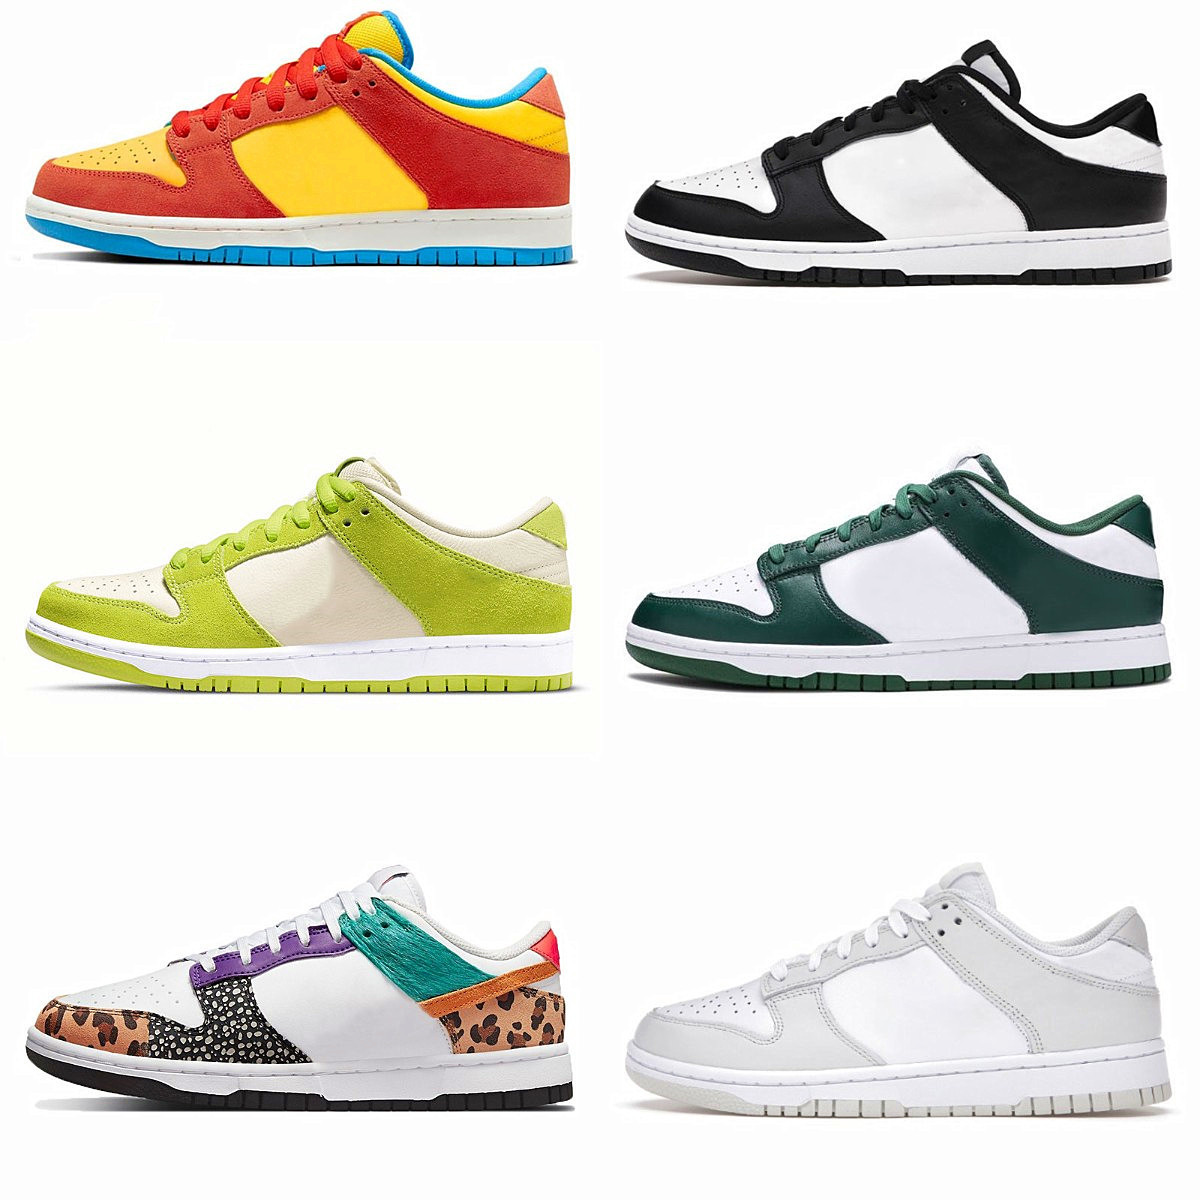 

2022 Classic SB Lows Running Shoes DuNkES Paisley UNC World Champ Women Men Grey Fog Barber Shop Union Low Sports Black White Green Cherry Sun Club Trainer Sneakers, Please contact us